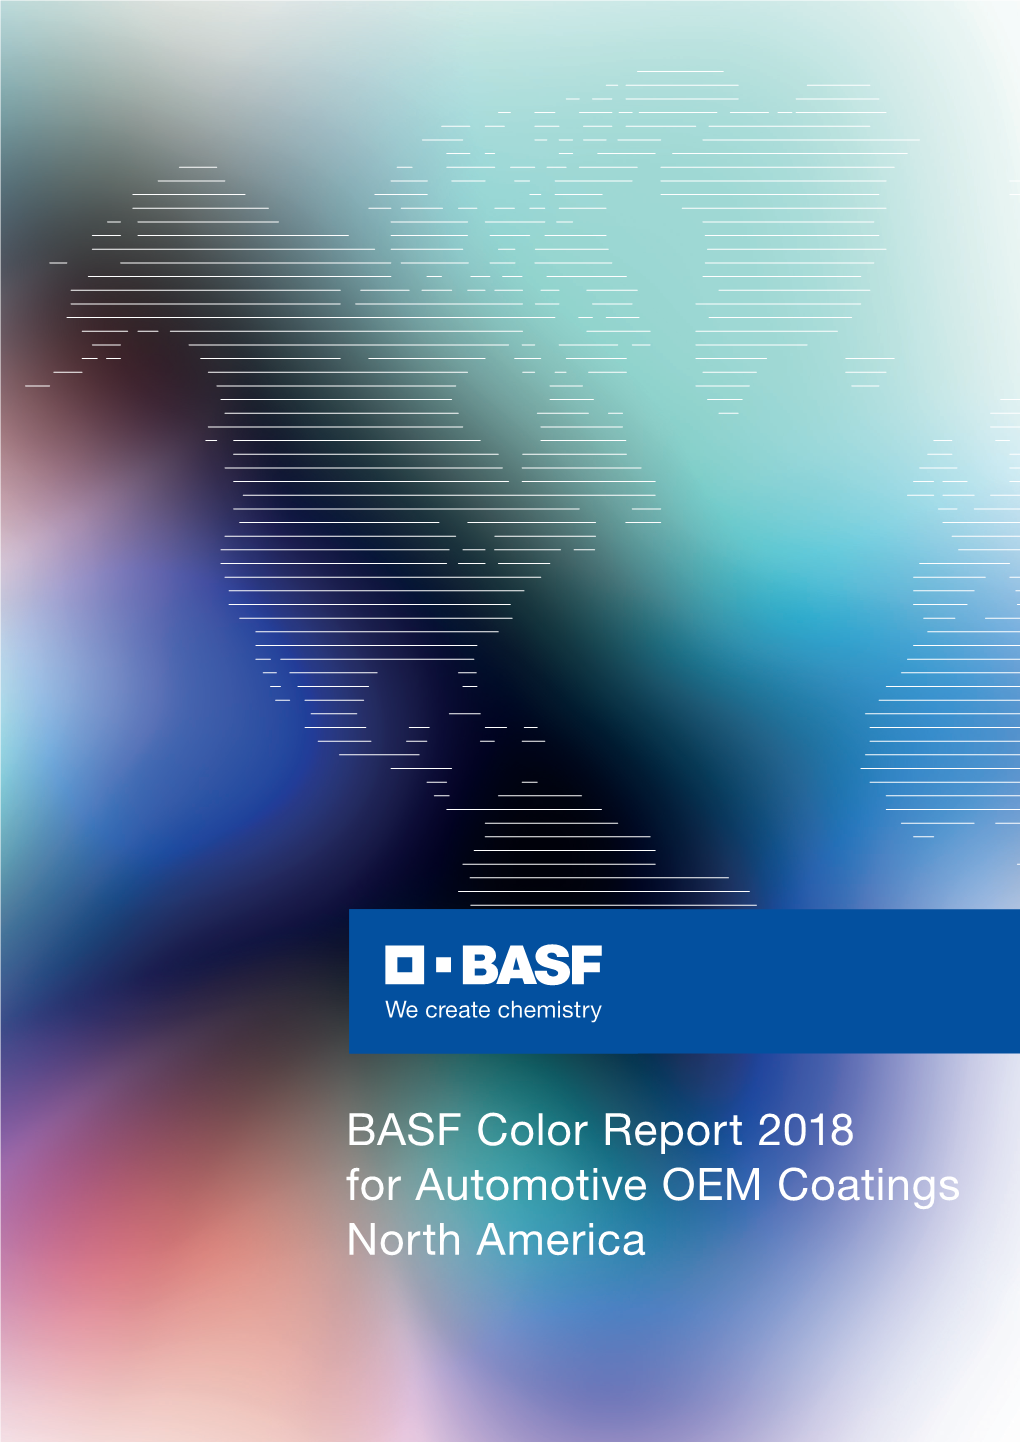 BASF Color Report 2018 for Automotive OEM Coatings North America BASF Color Report 2018 for Automotive OEM Coatings North America